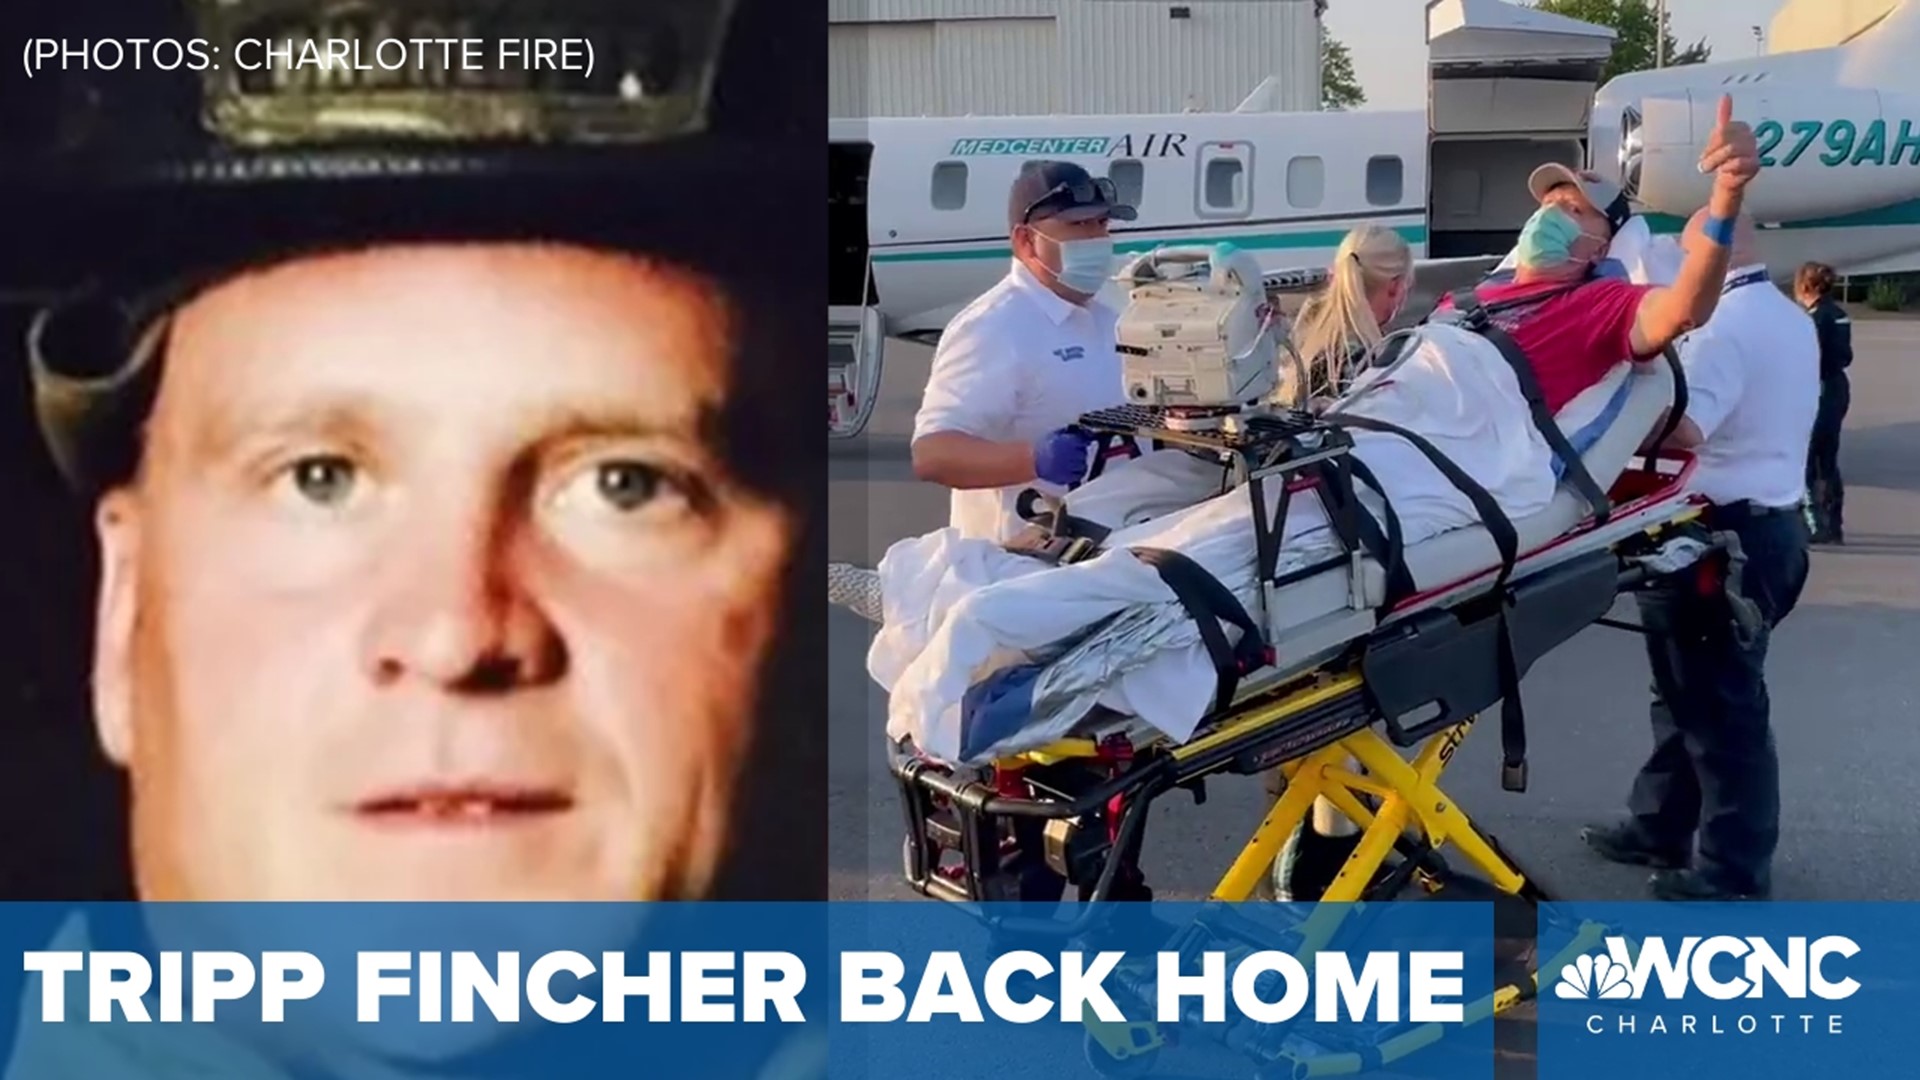 Tripp Fincher was hurt in a hunting accident in Kansas, but is now back in Charlotte for treatment.